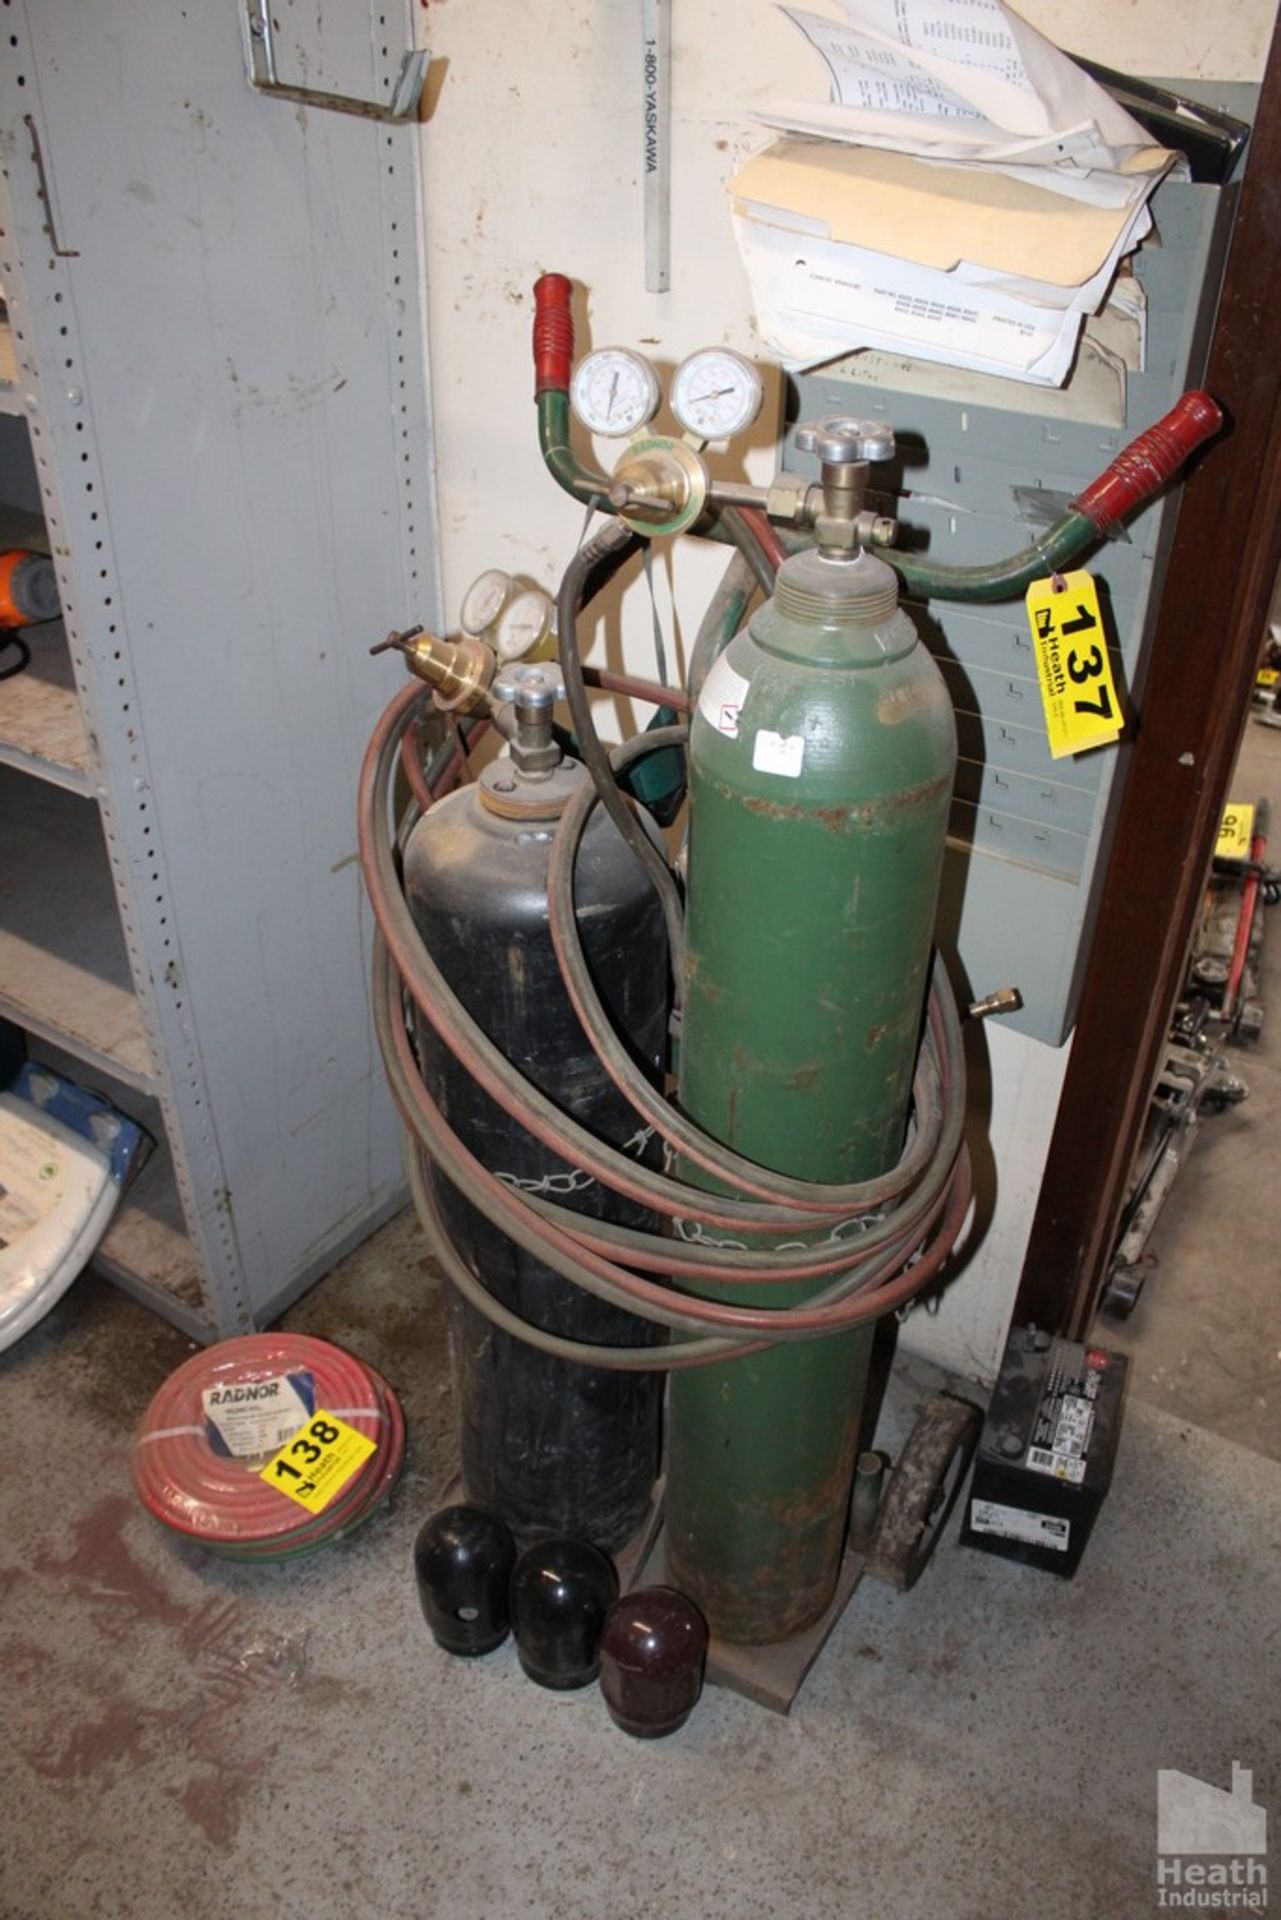 WELDING CART WITH TWO TANKS, HOSES, TORCH AND GAGES